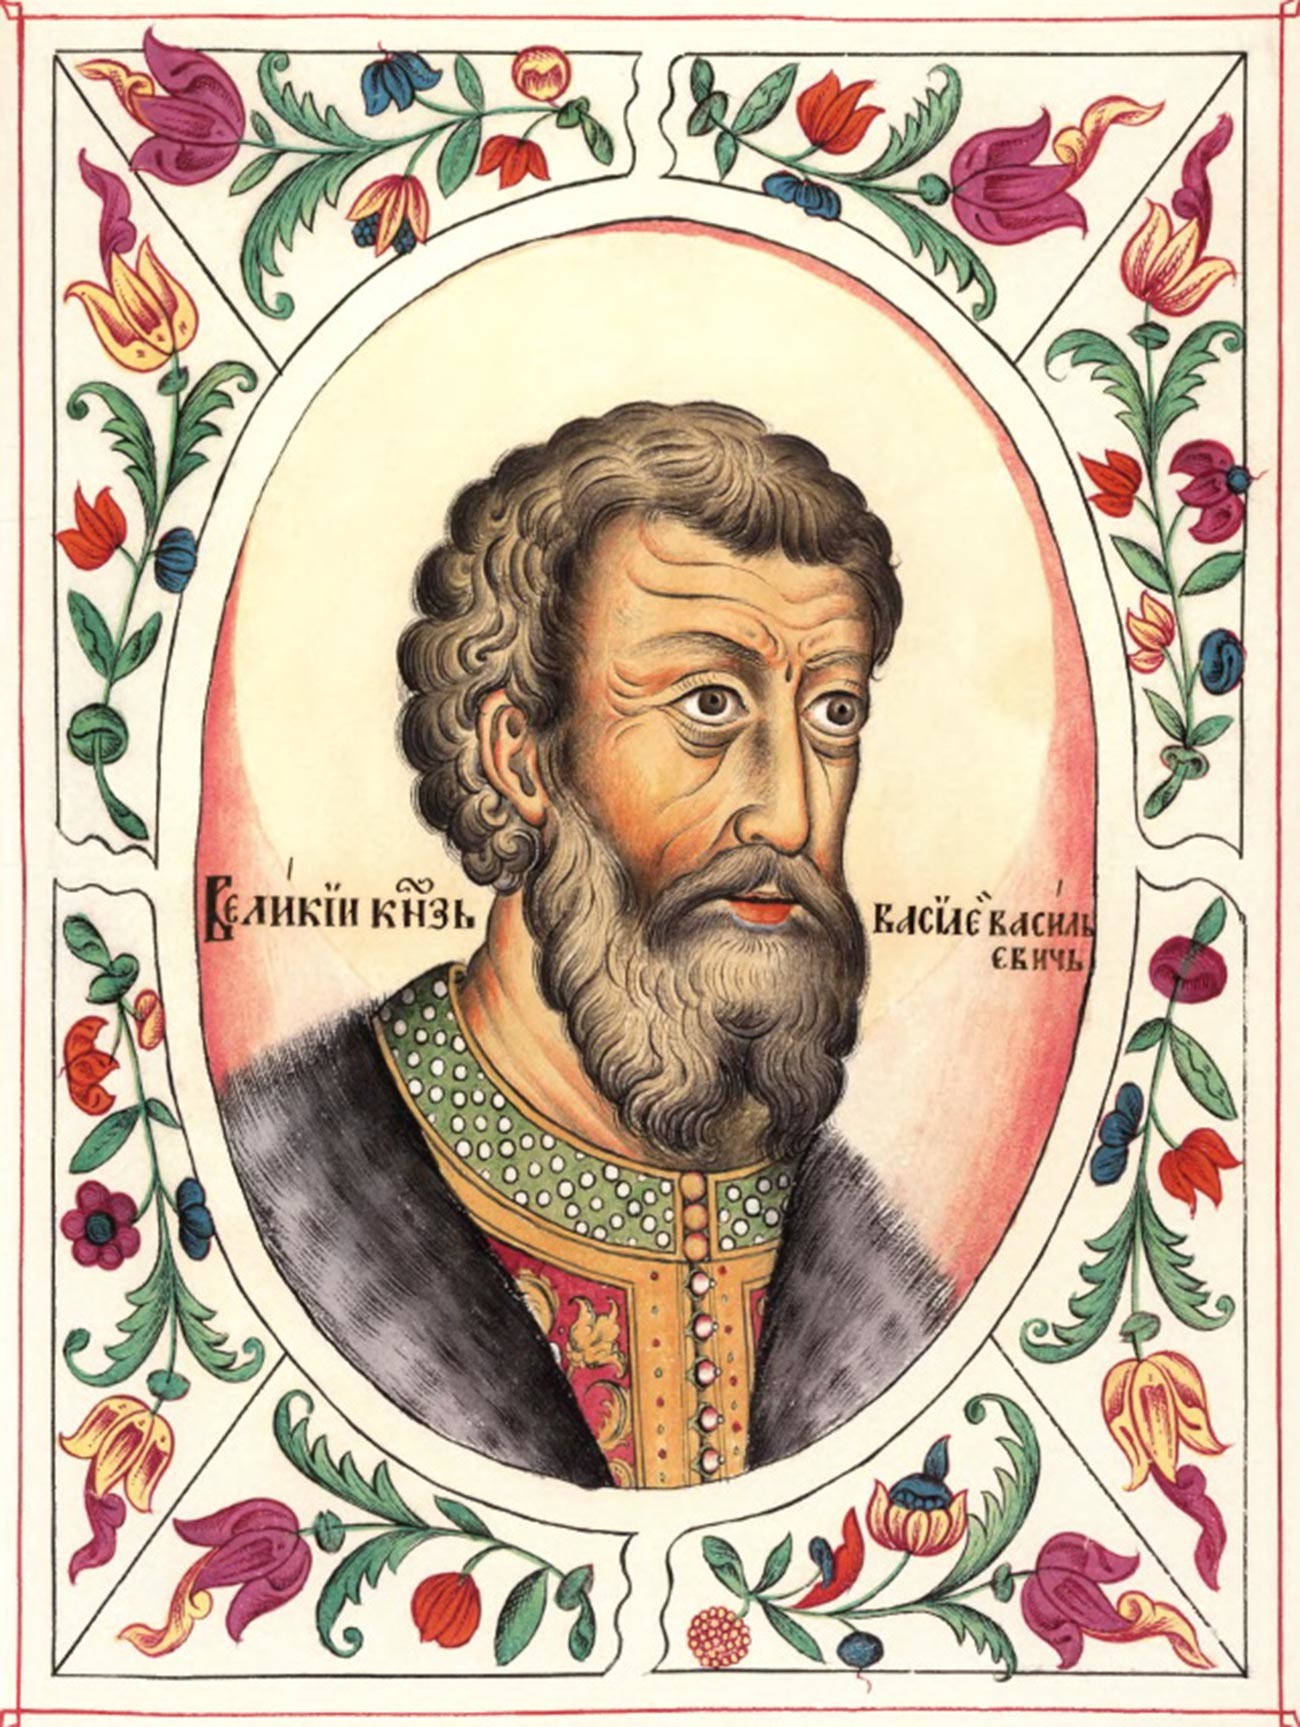 Vasily II of Moscow. This portrait is just a picture from a chronicle. We don't have any images of Vasily and don't know how he looked like. 